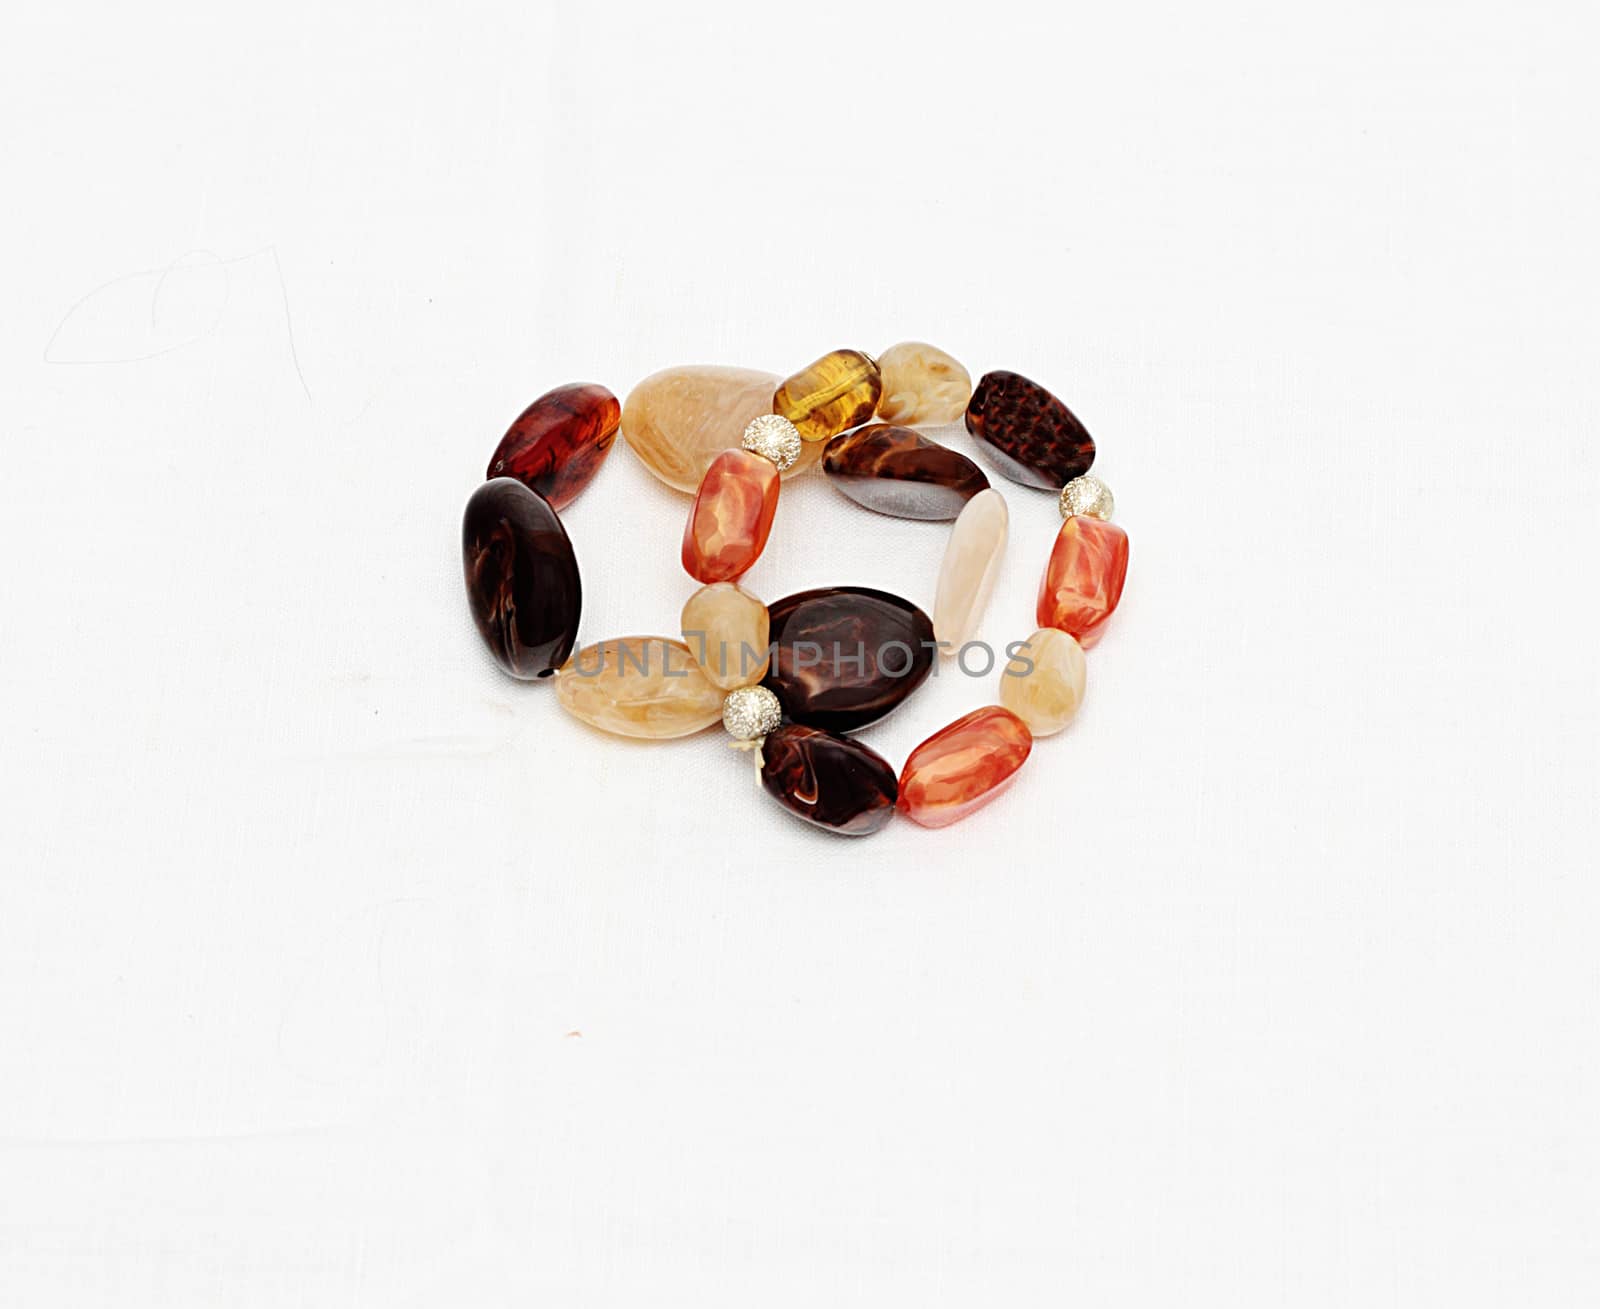 Two female bracelets from semi-precious stones isolated against white background.